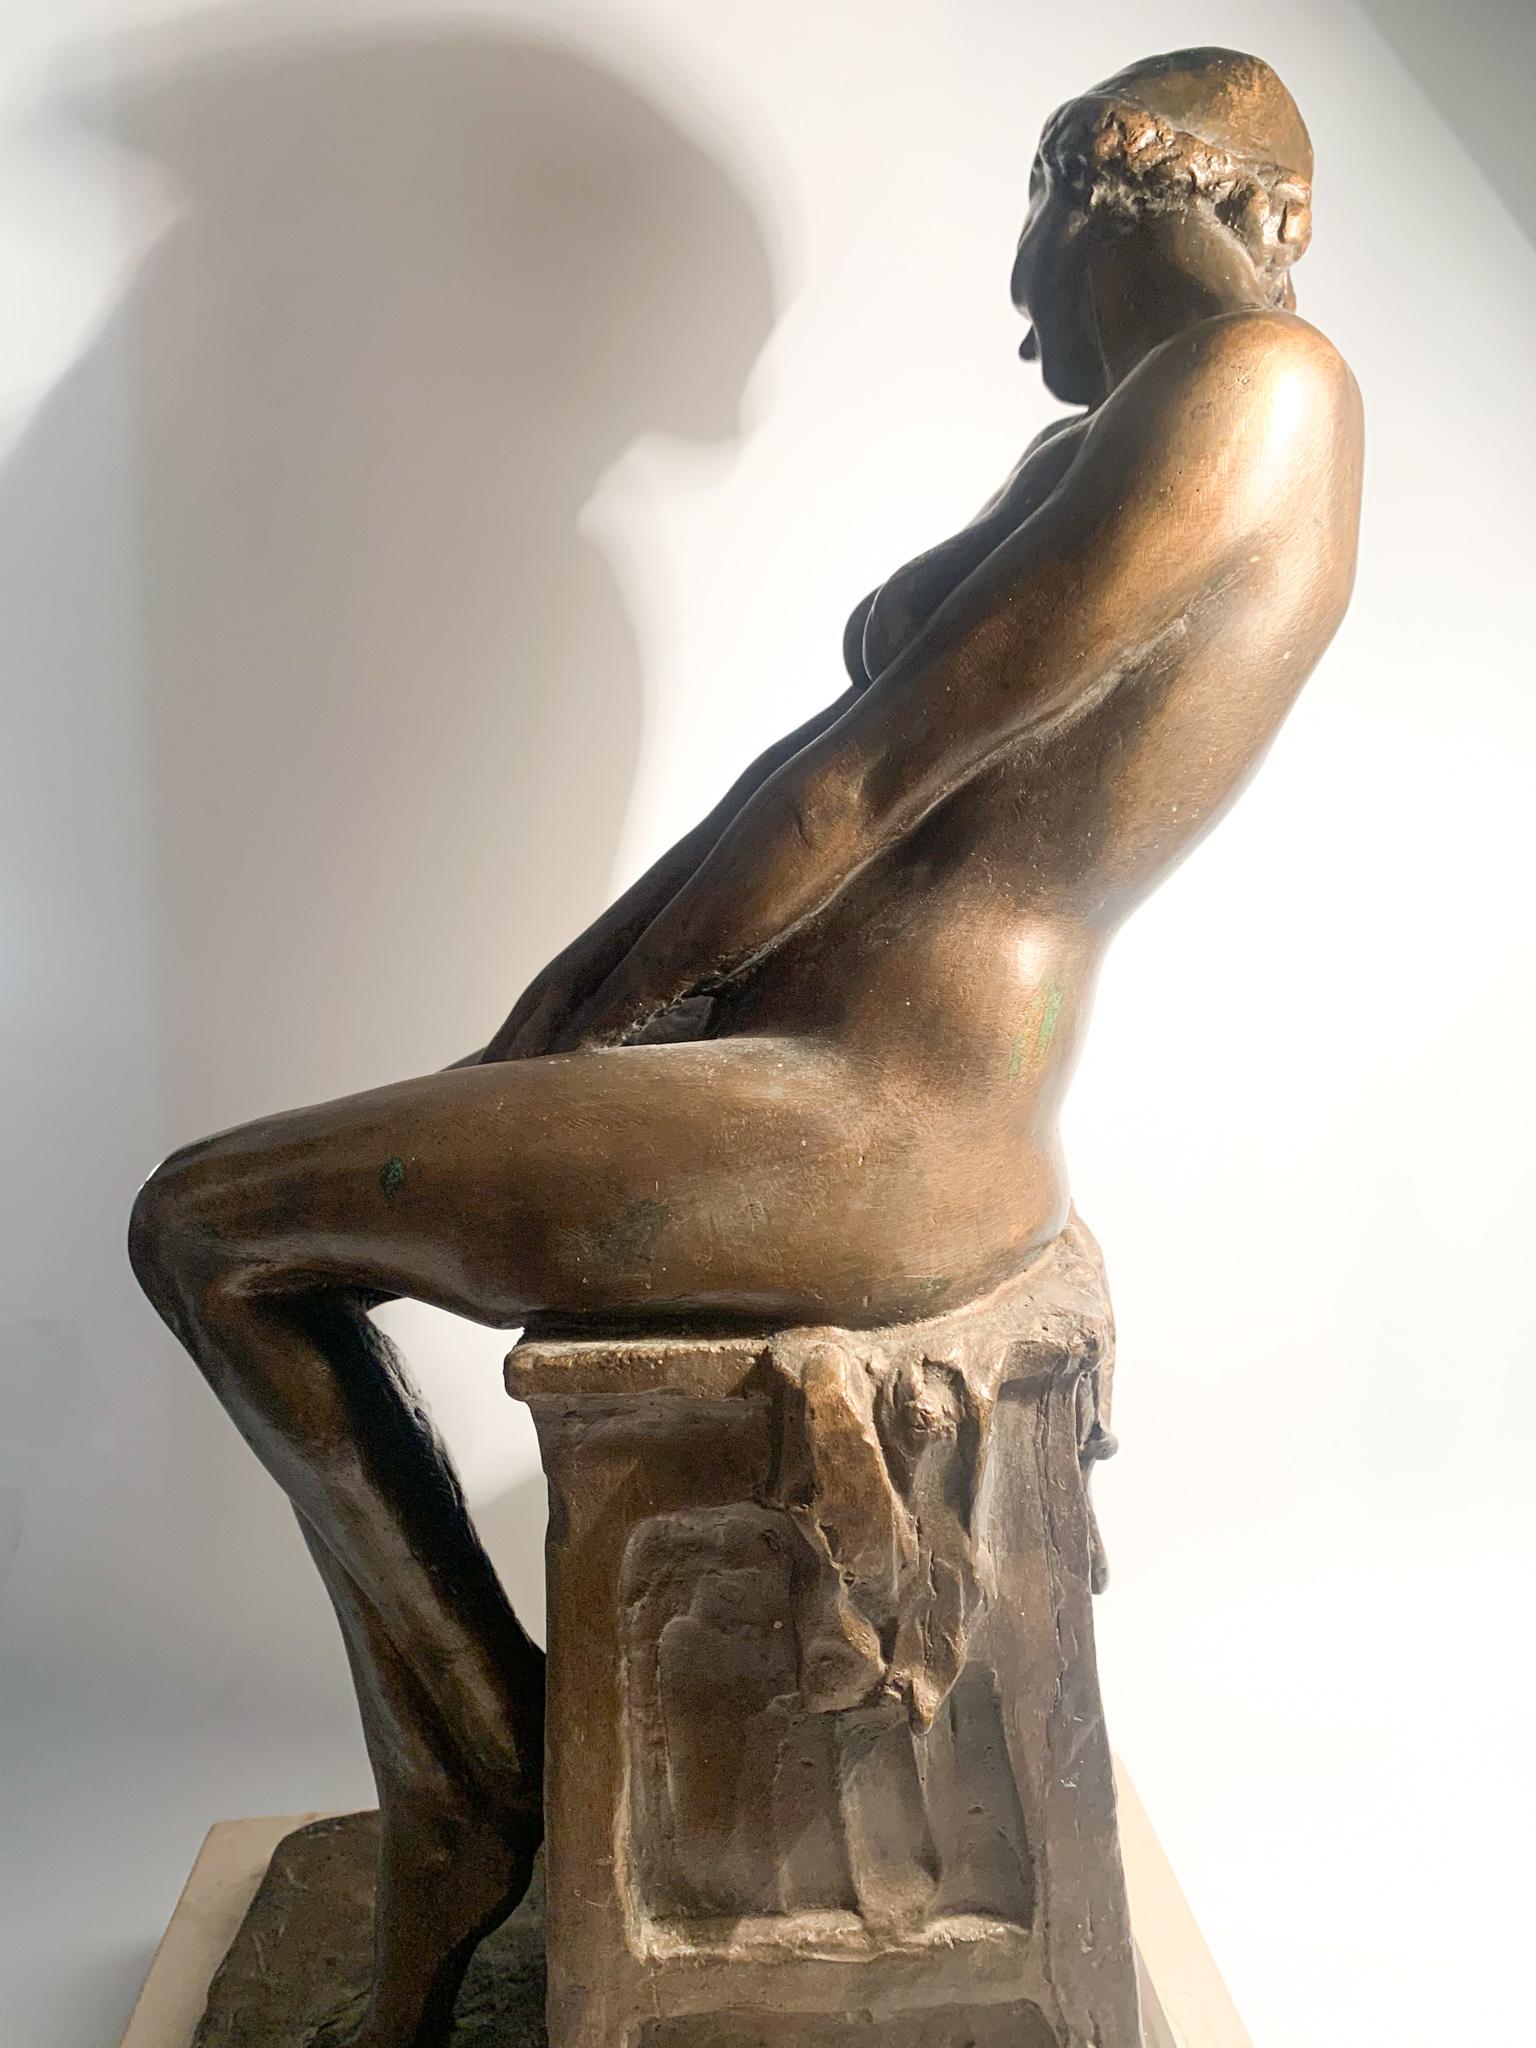 Italian Bronze Sculpture of a Nude Woman by Aurelio Capsoni, Early 1900 For Sale 5